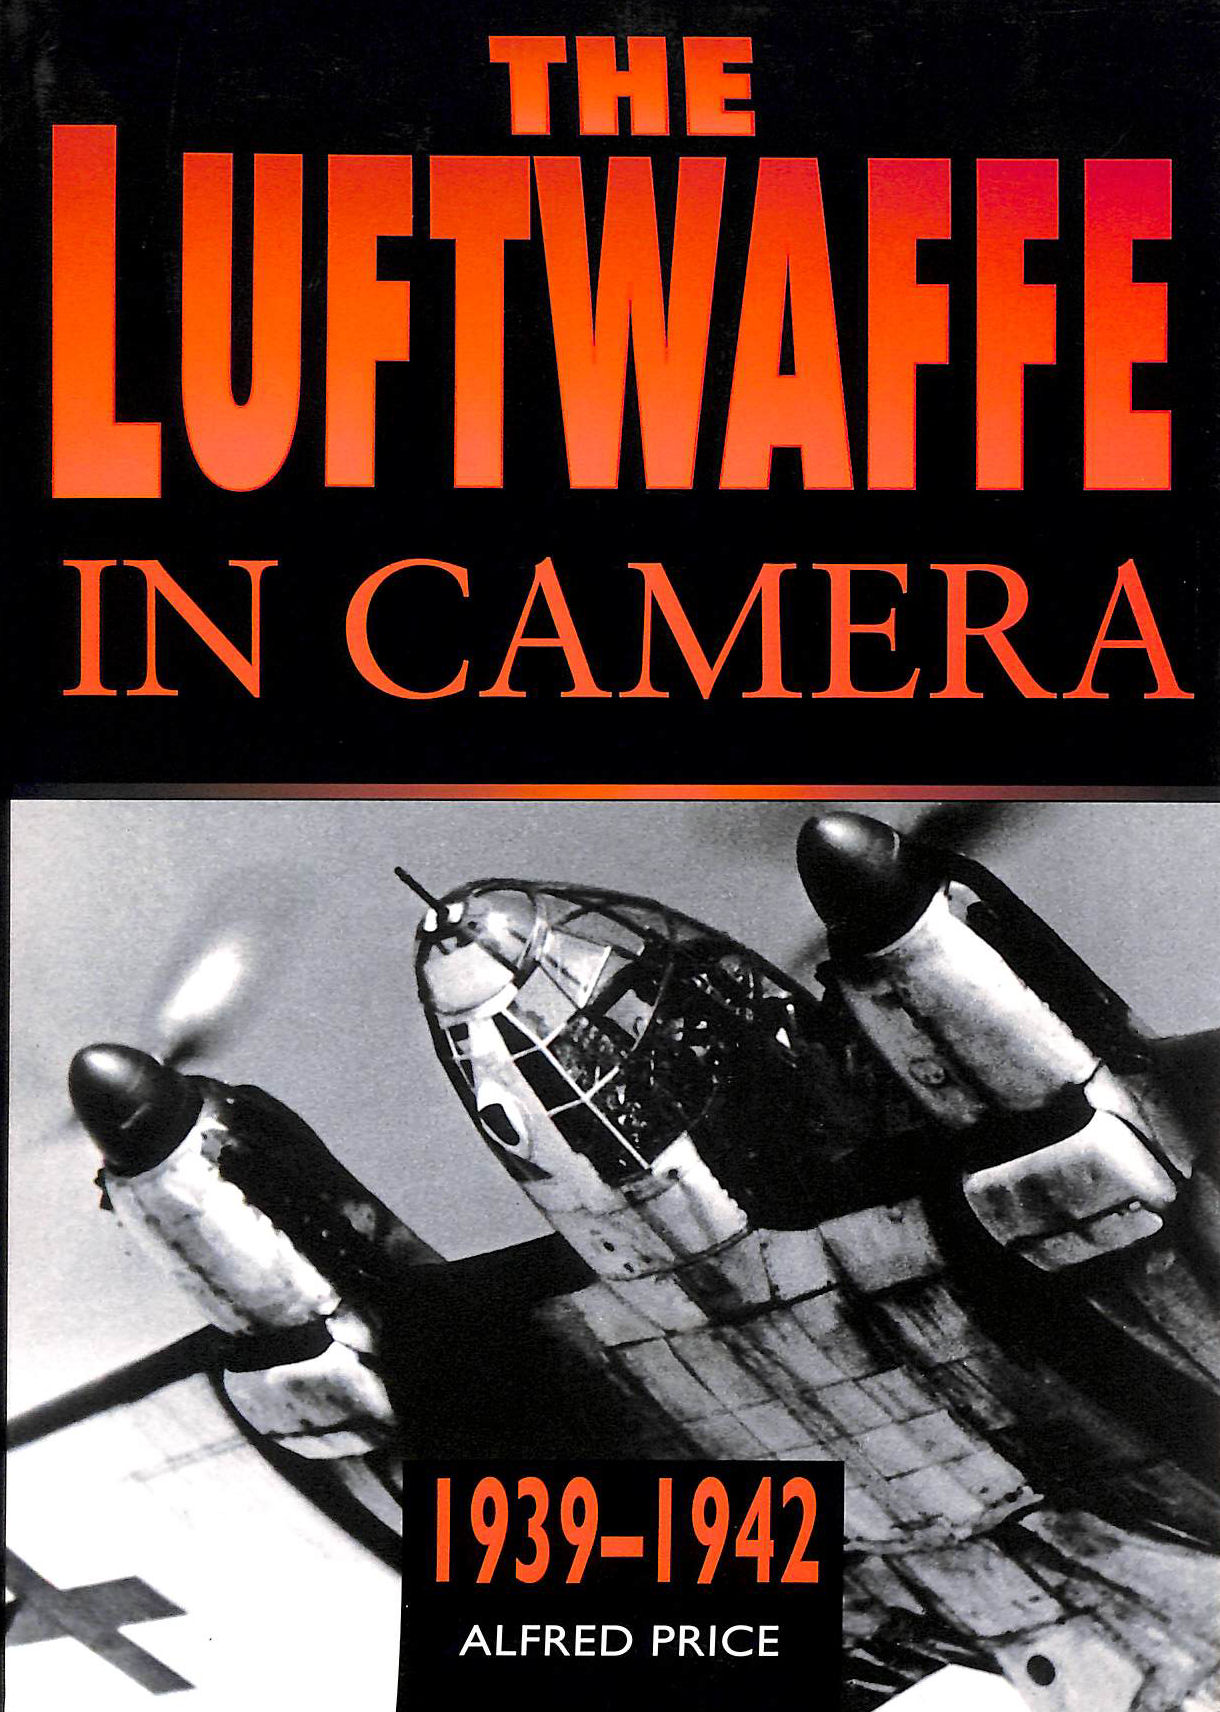 PRICE, ALFRED - The Luftwaffe in Camera, 1939-1942